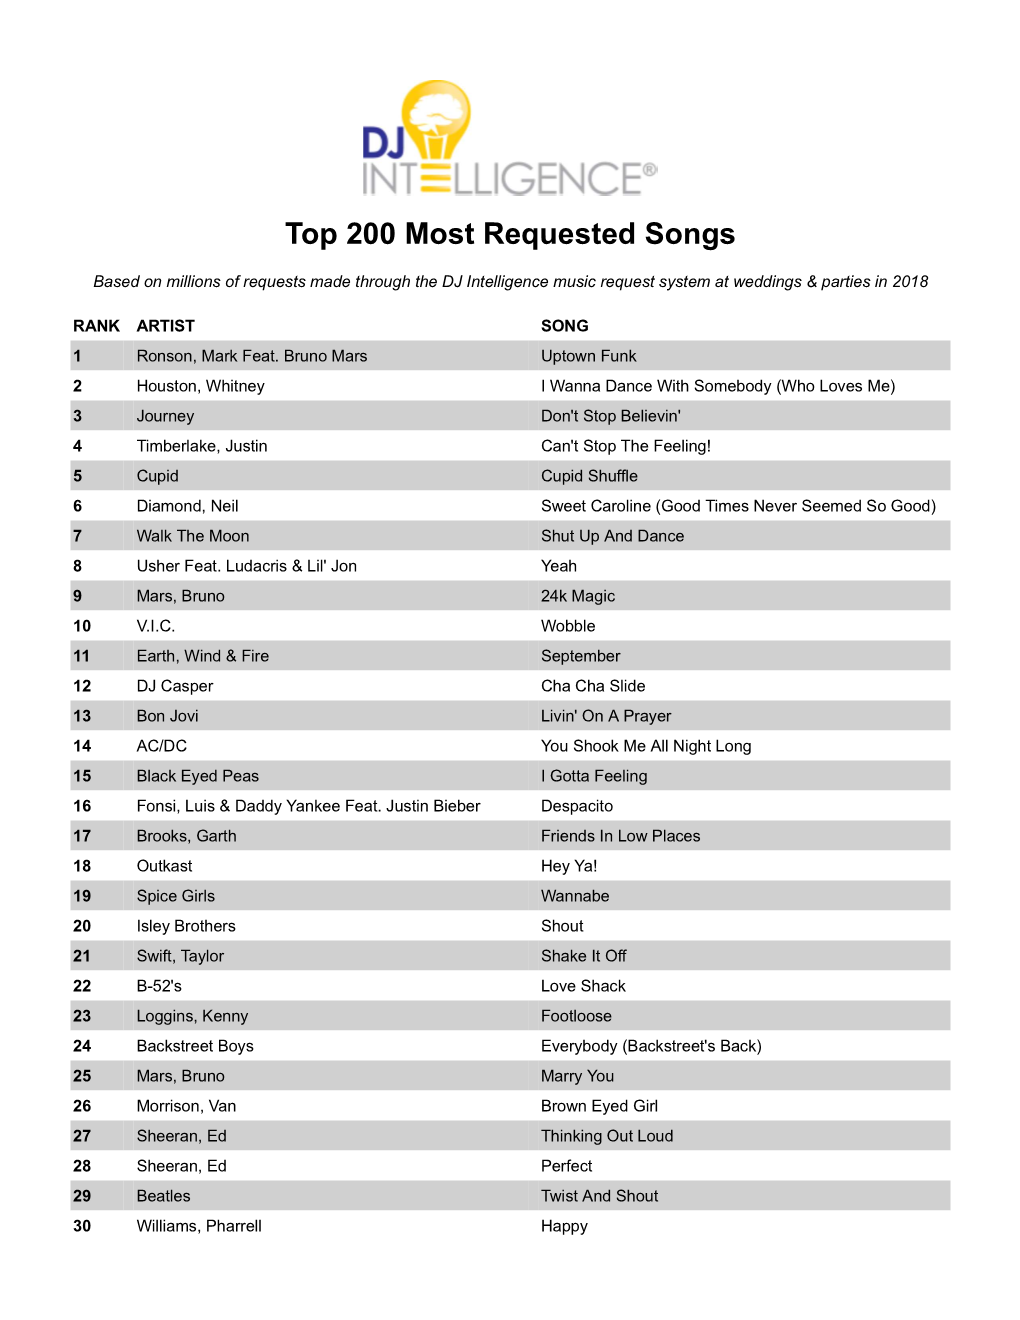 Most Requested Songs of 2018